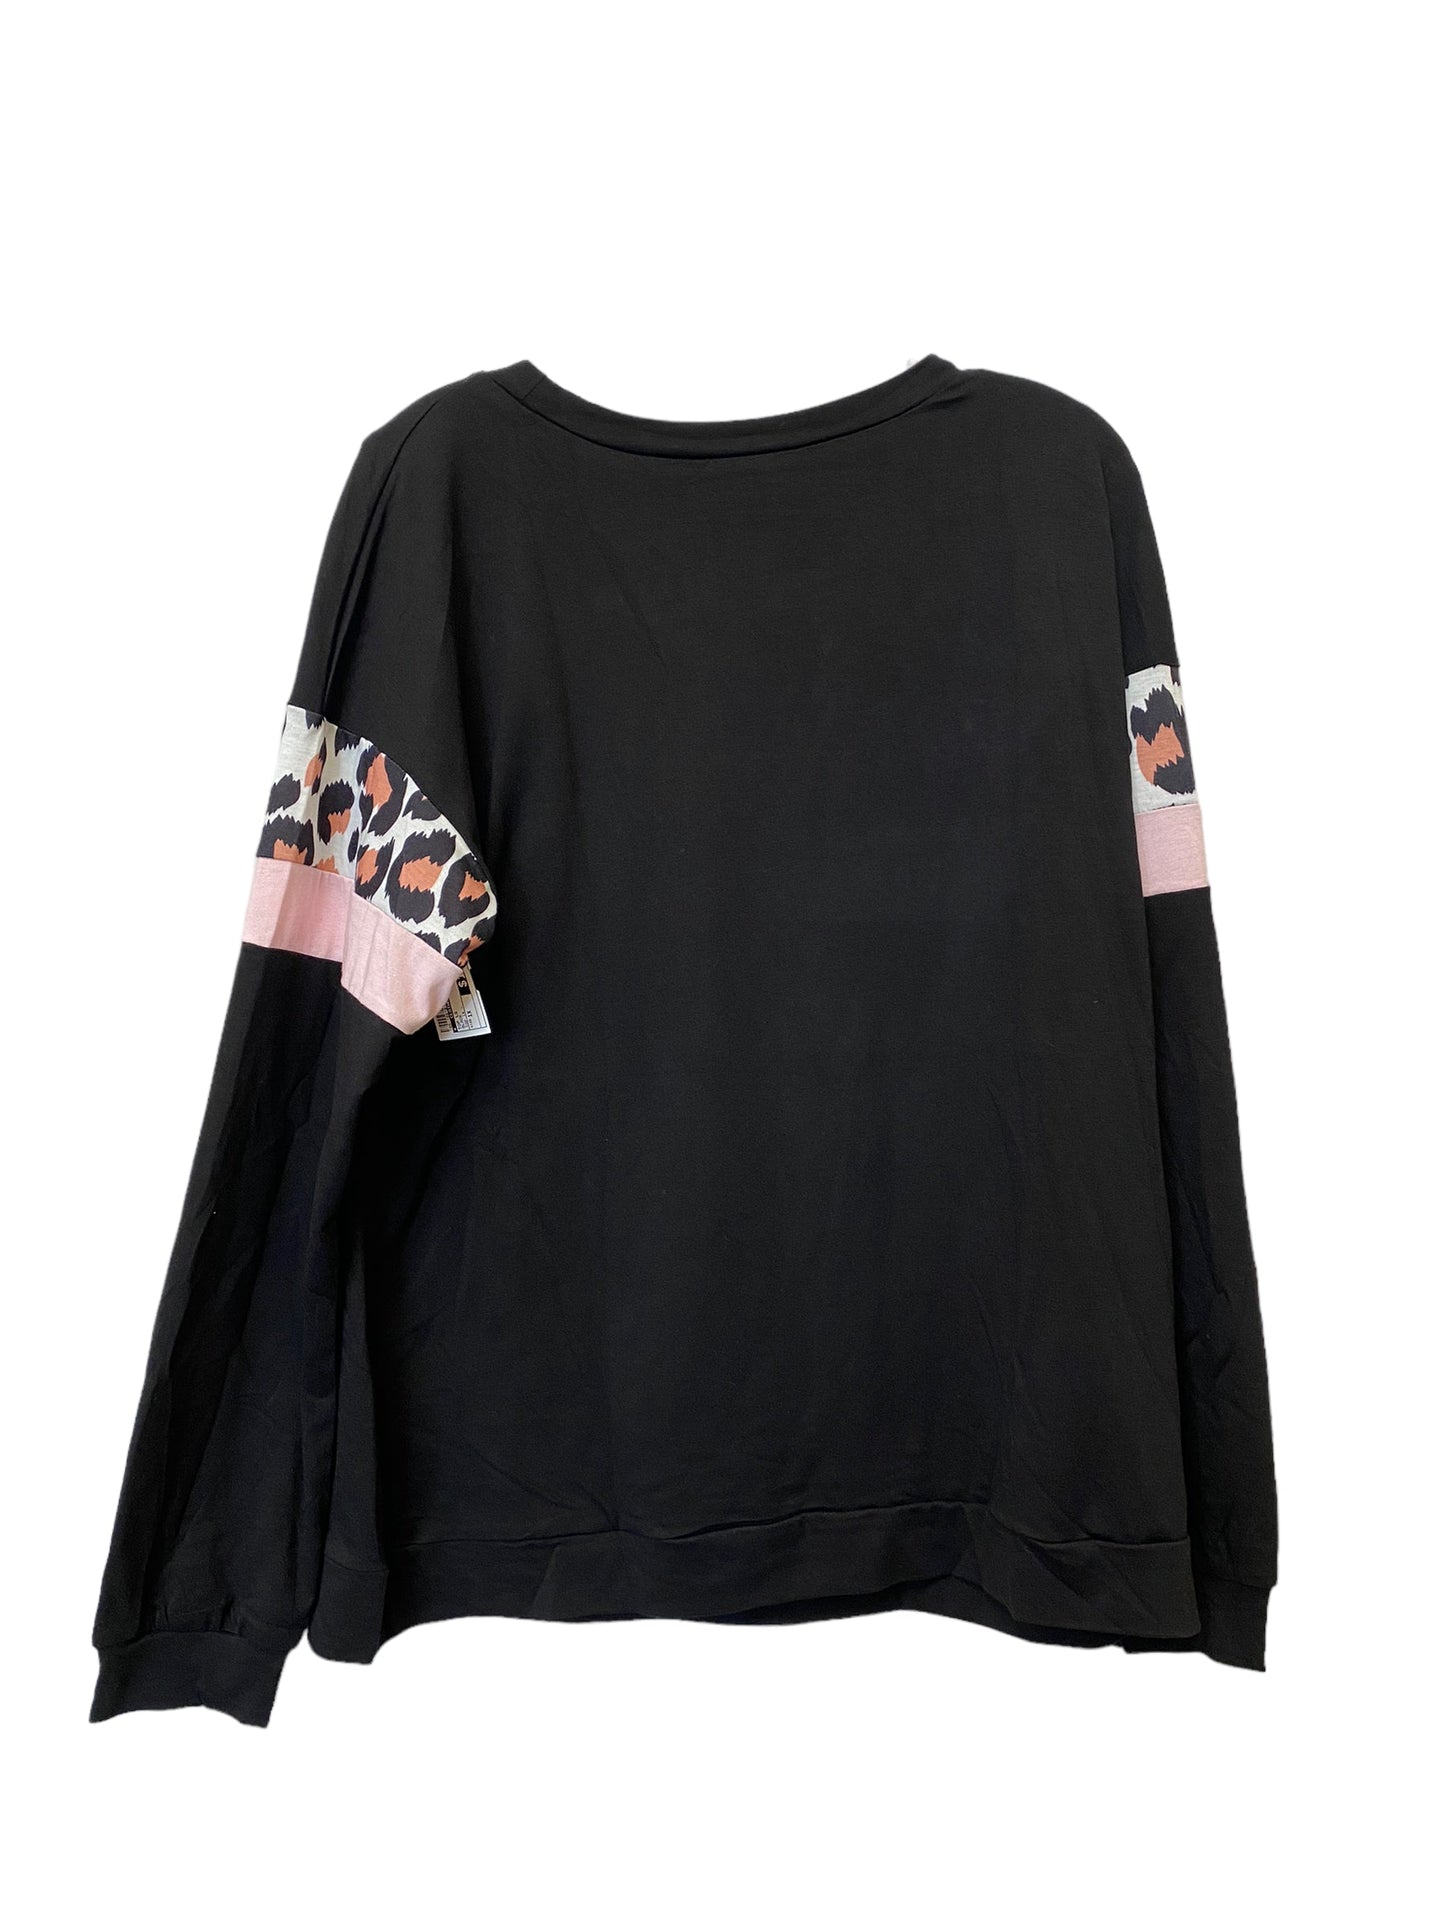 Top Long Sleeve By Clothes Mentor  Size: 1x